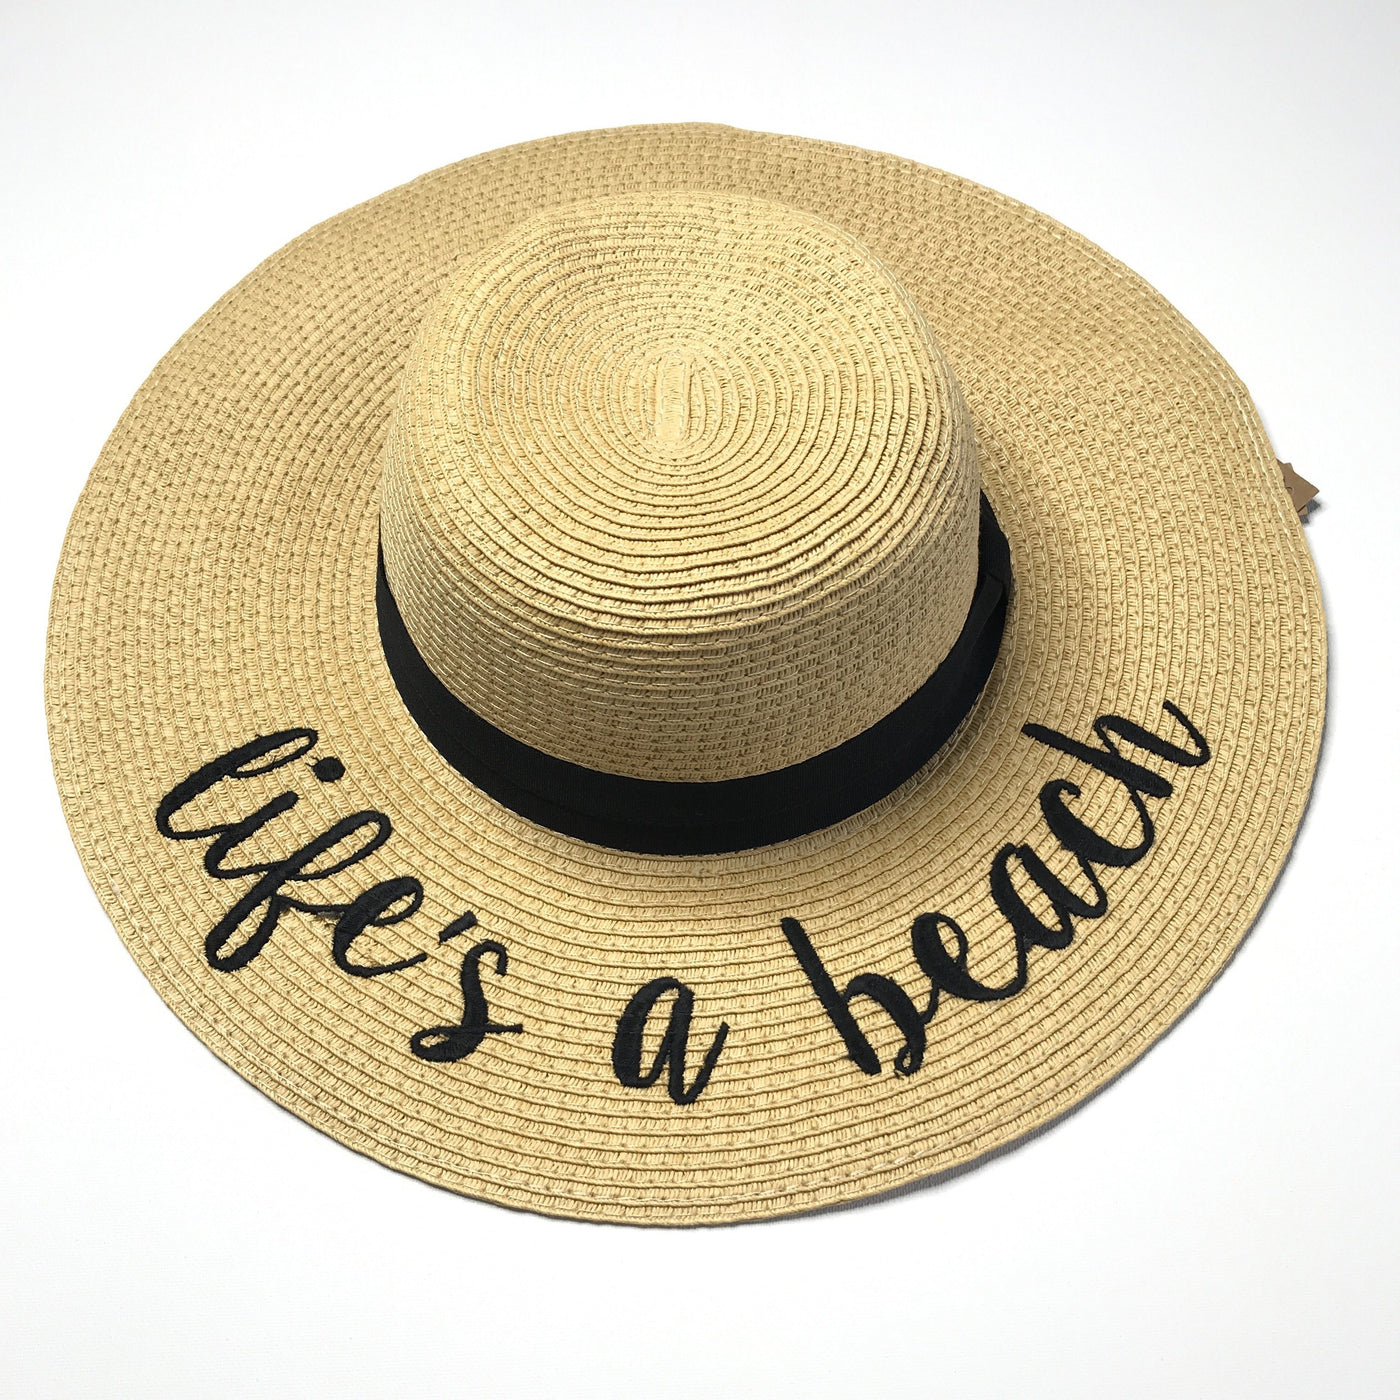 Floppy Straw Hat - "Life's a Beach" Adult straw floppy hat The Teal Bandit 